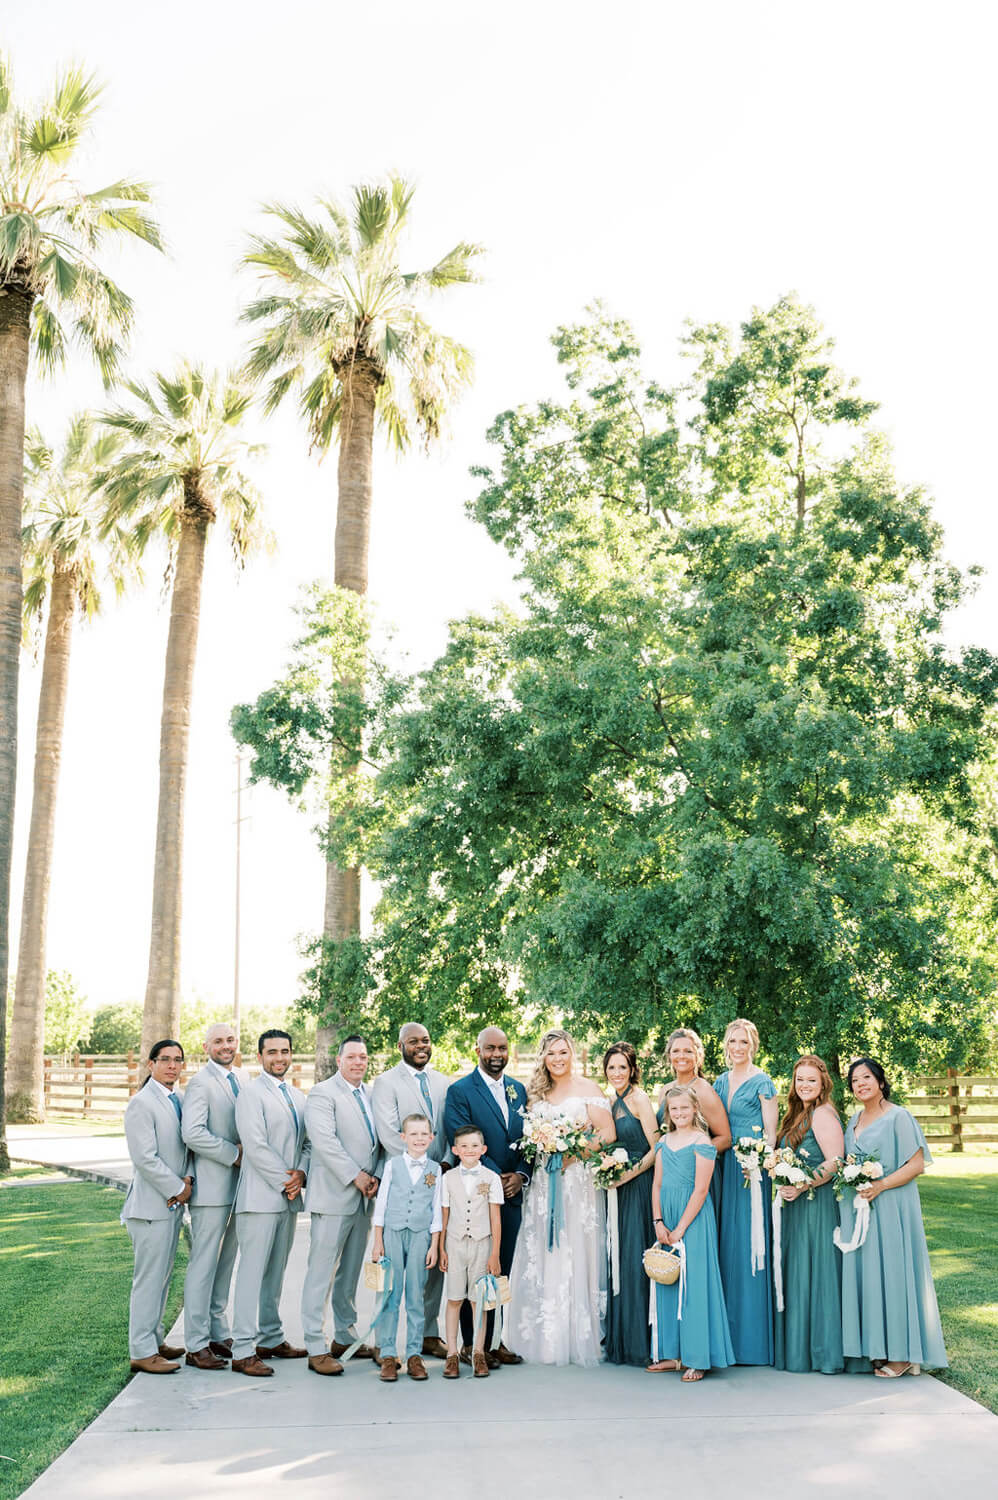 rustic wedding party fashion in blue and gray